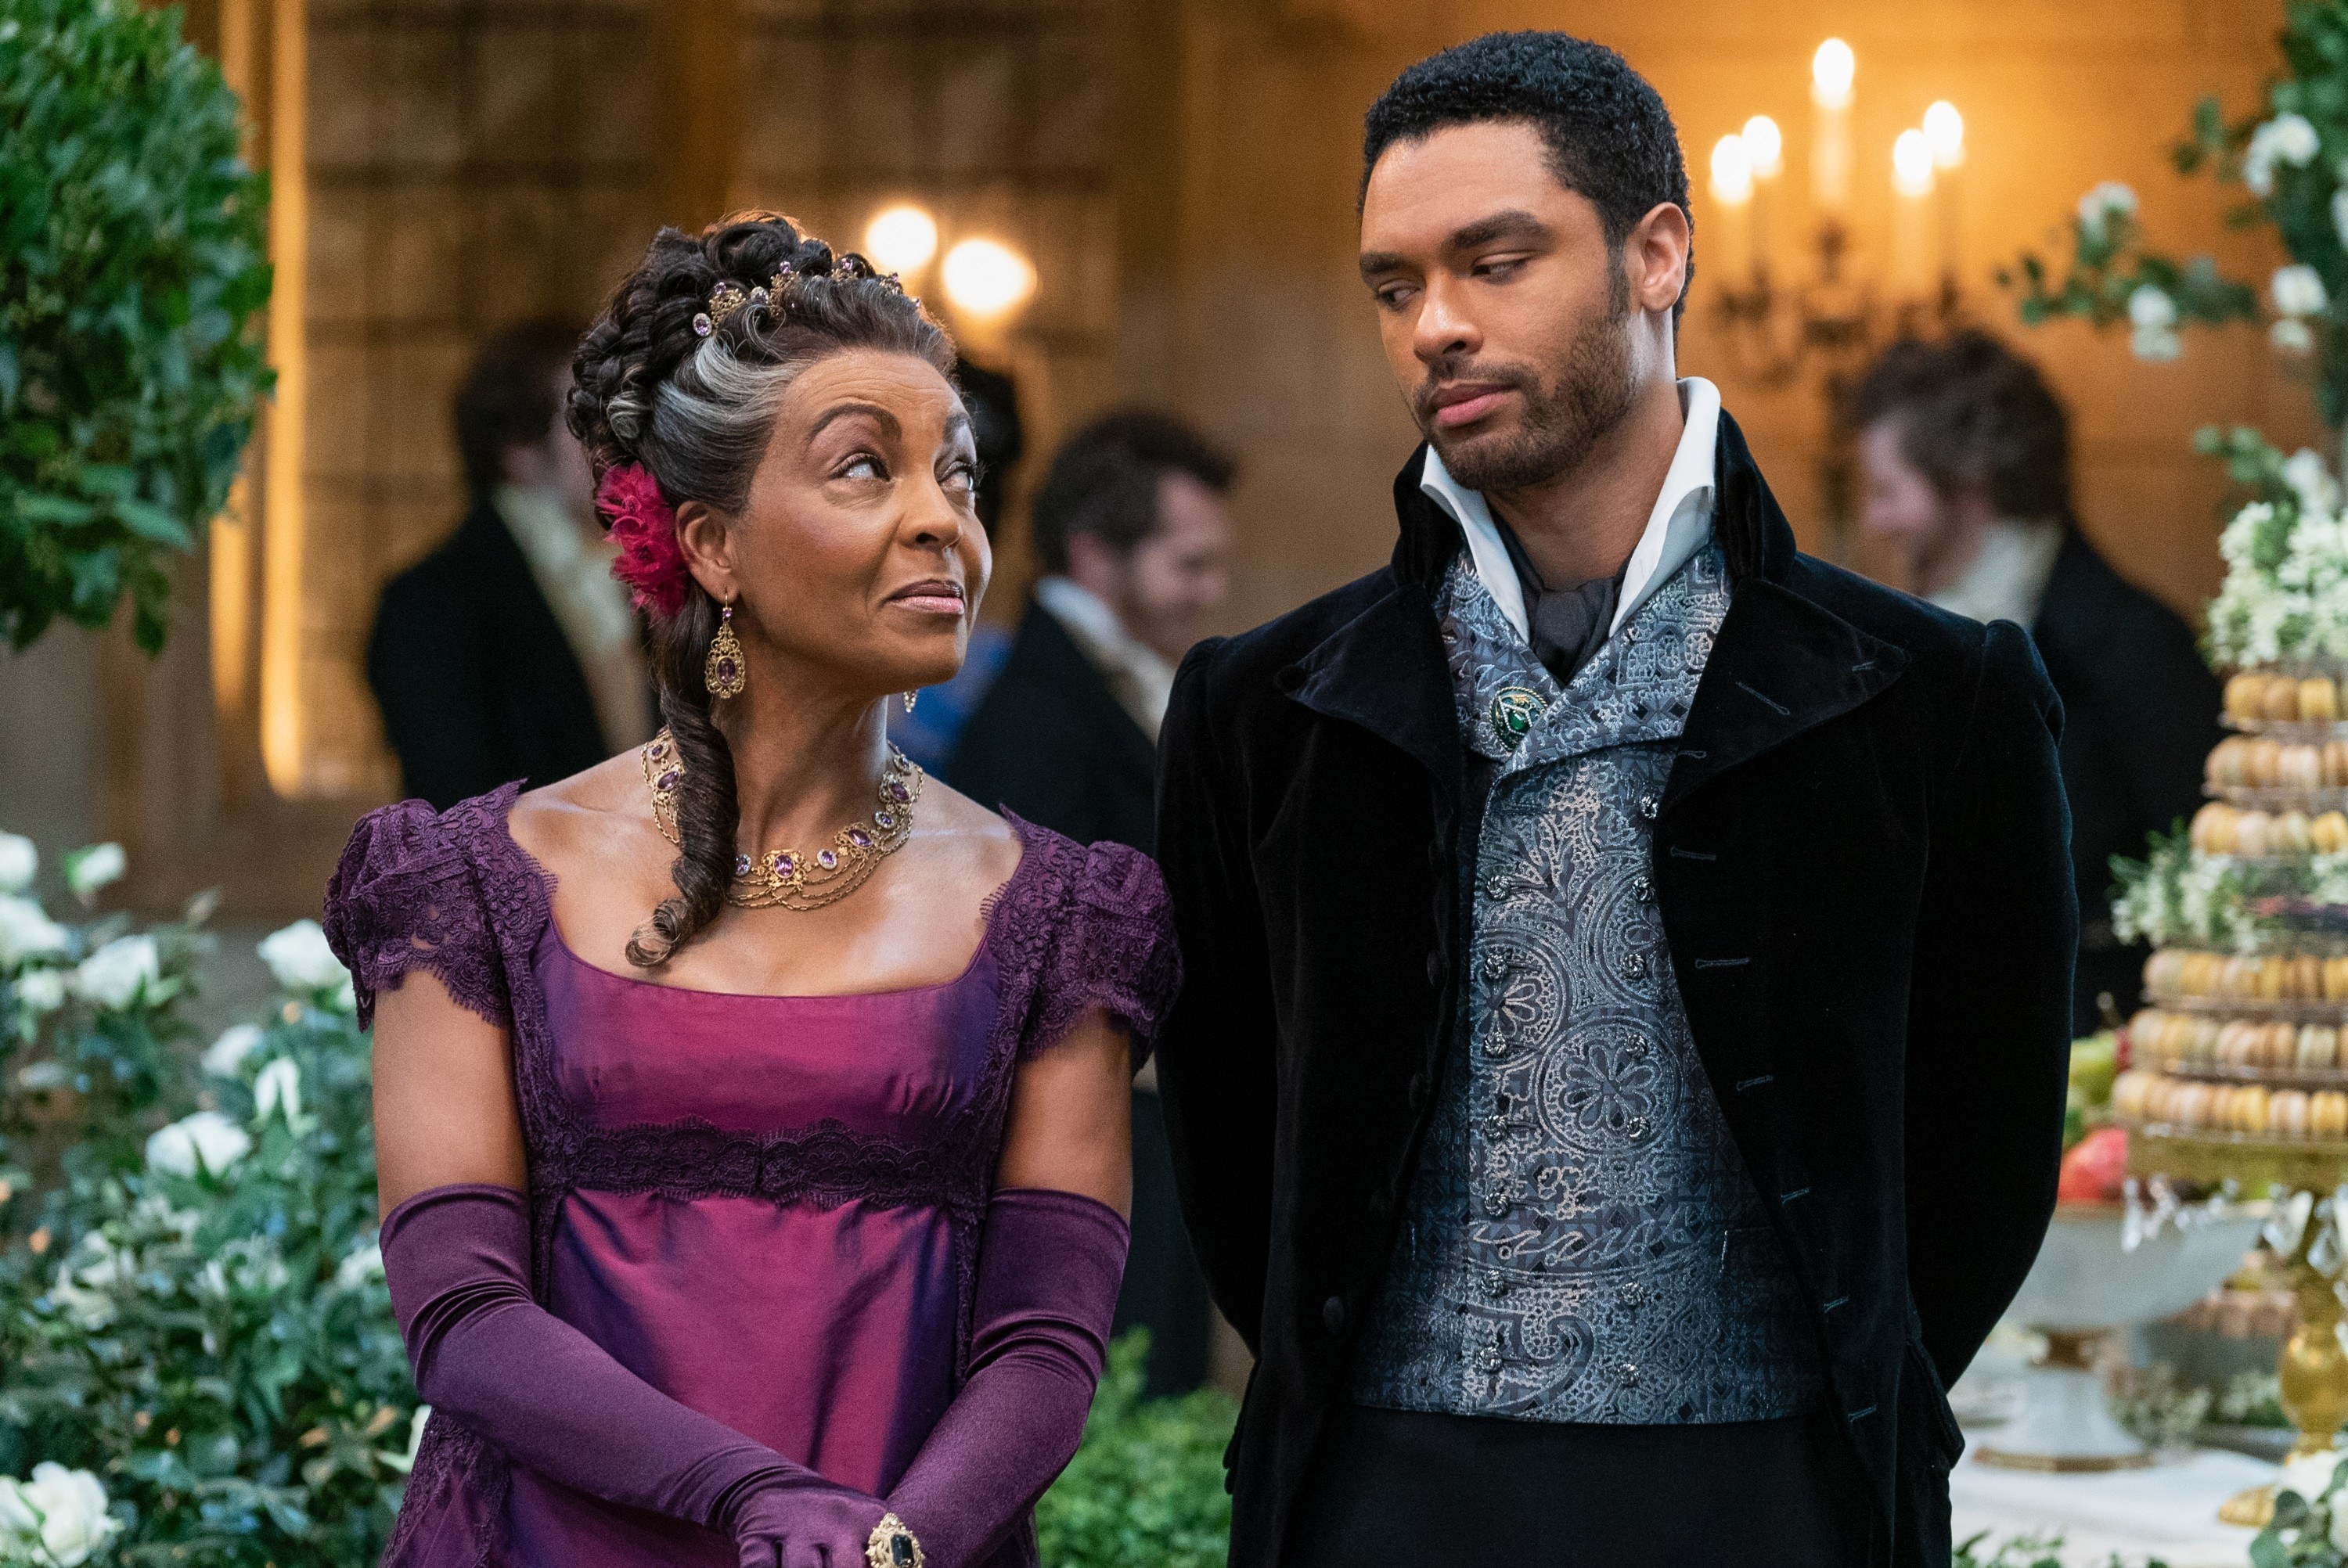 Adjoa Andoh as Lady Danbury and the Duke of Hastings speaking to one another at a ball